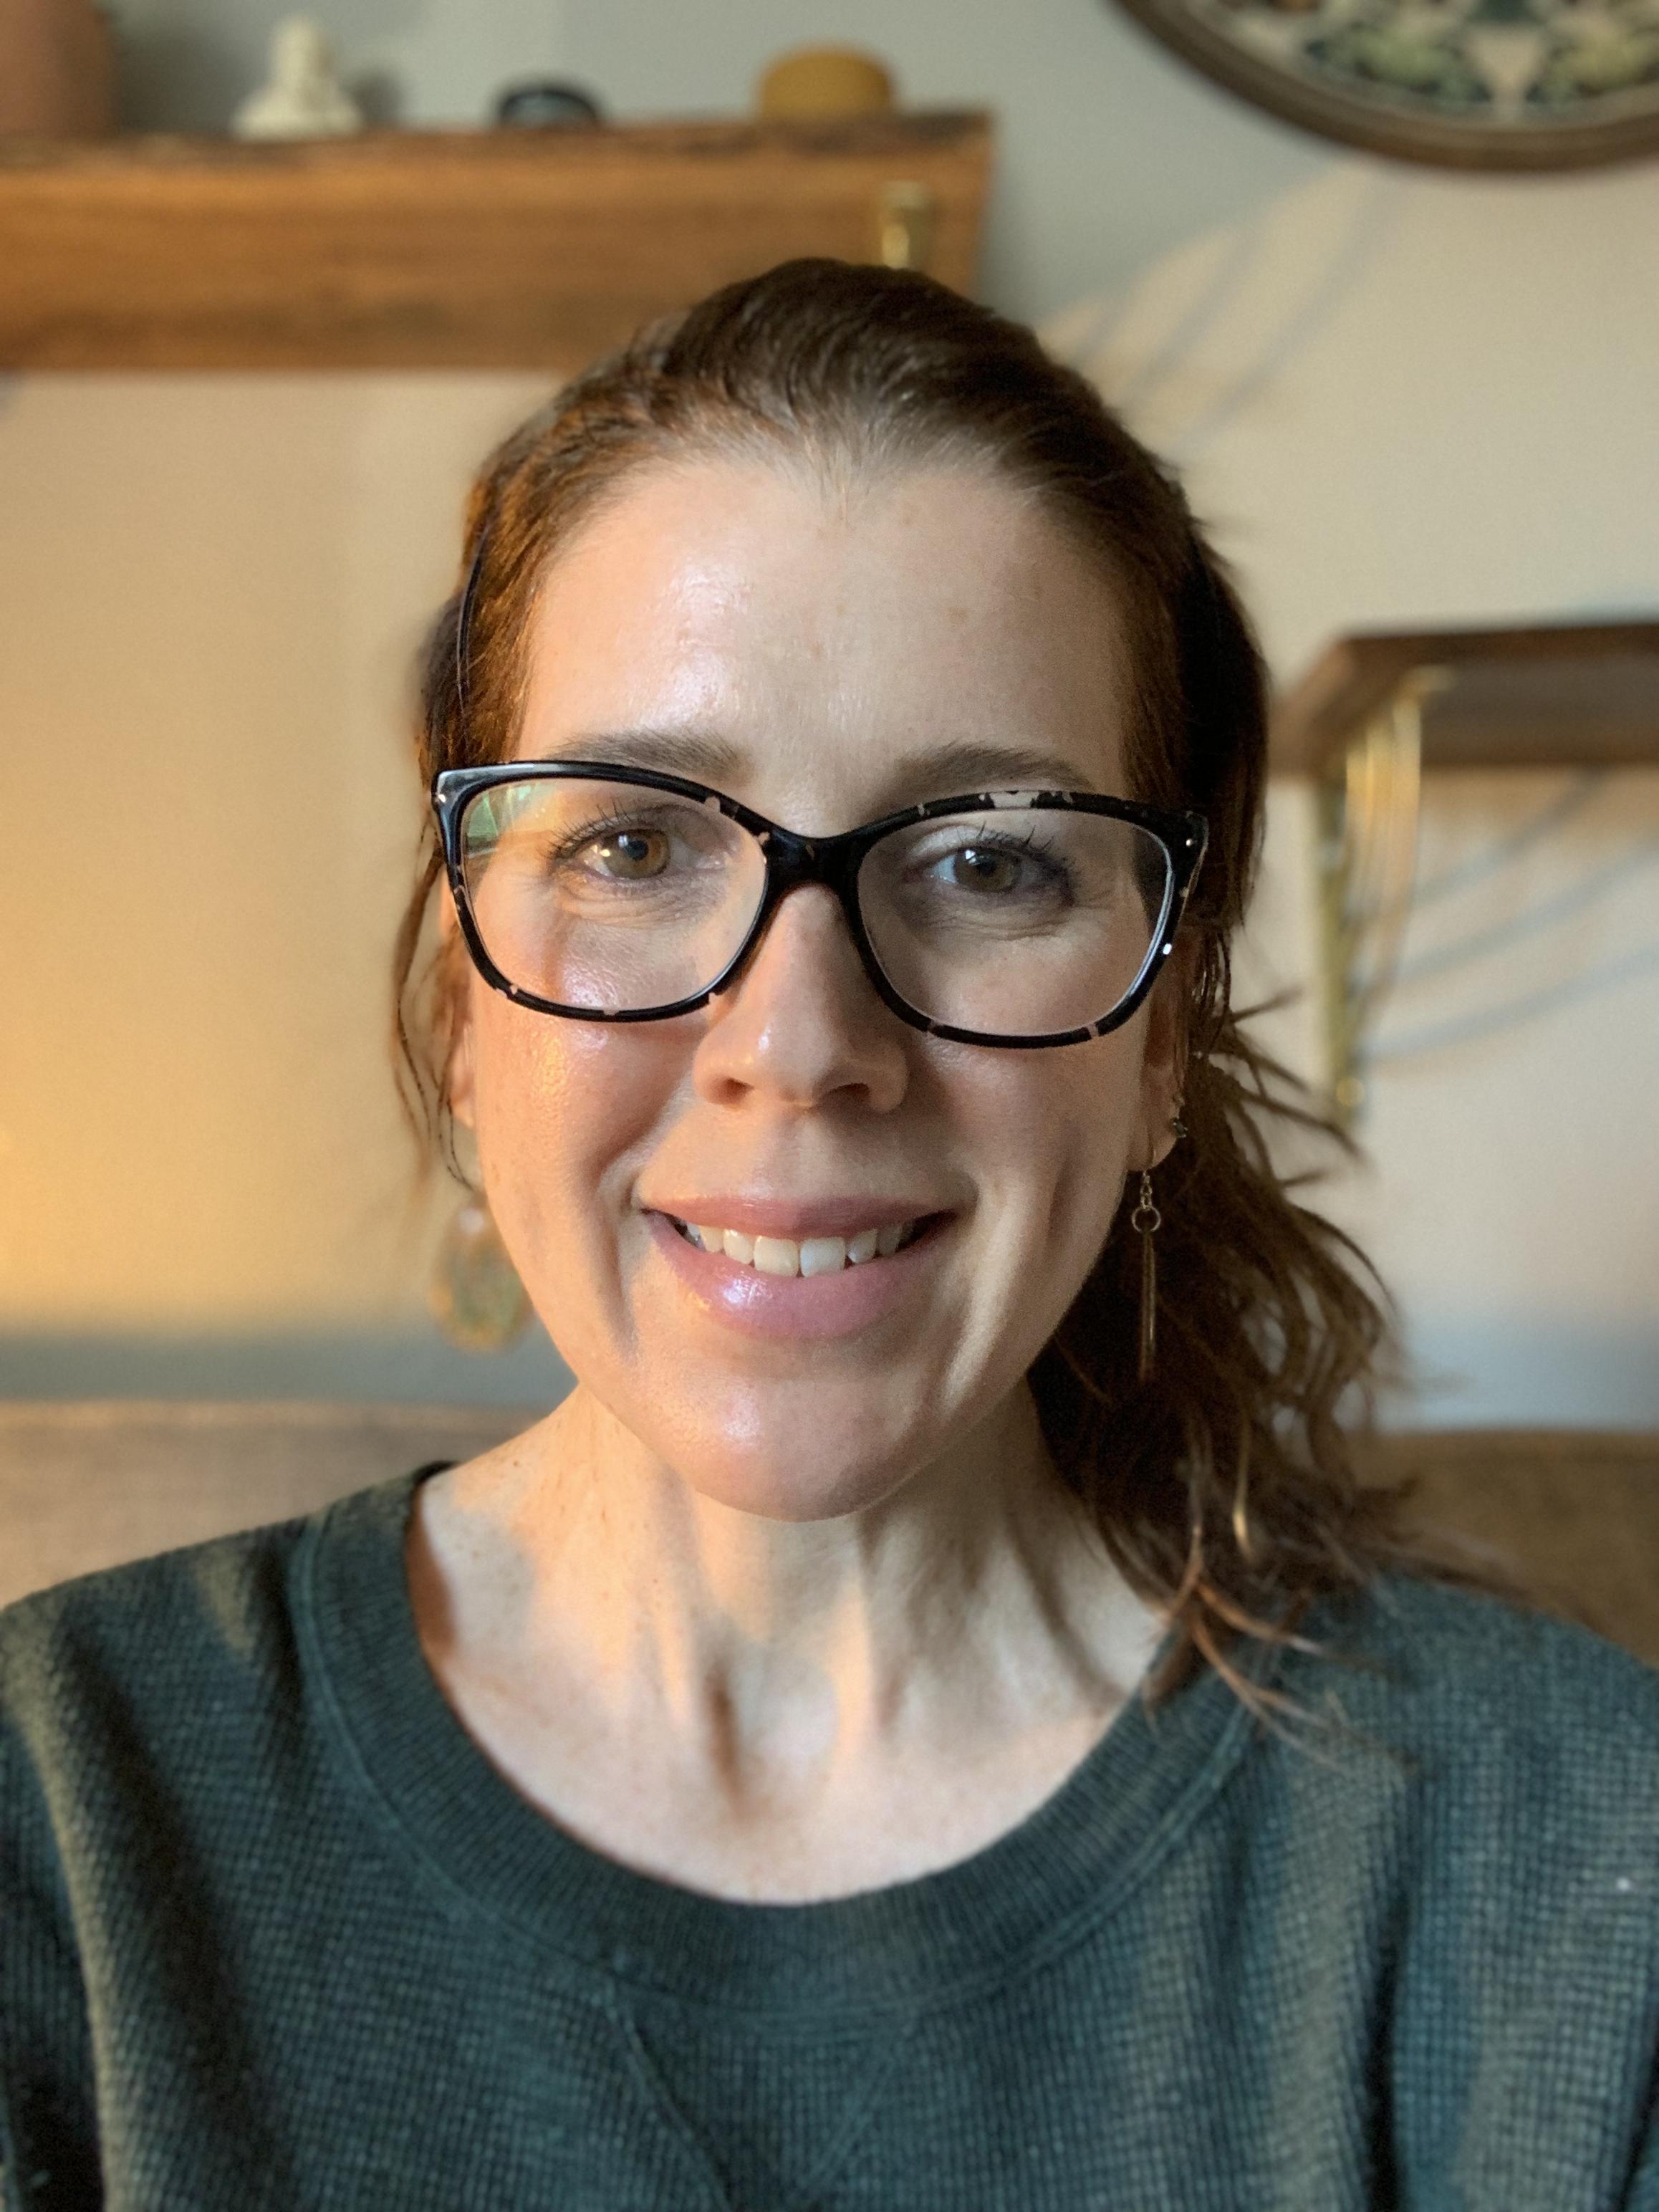 Jill Terra-Chesnut wearing a green and gray shirt and glasses